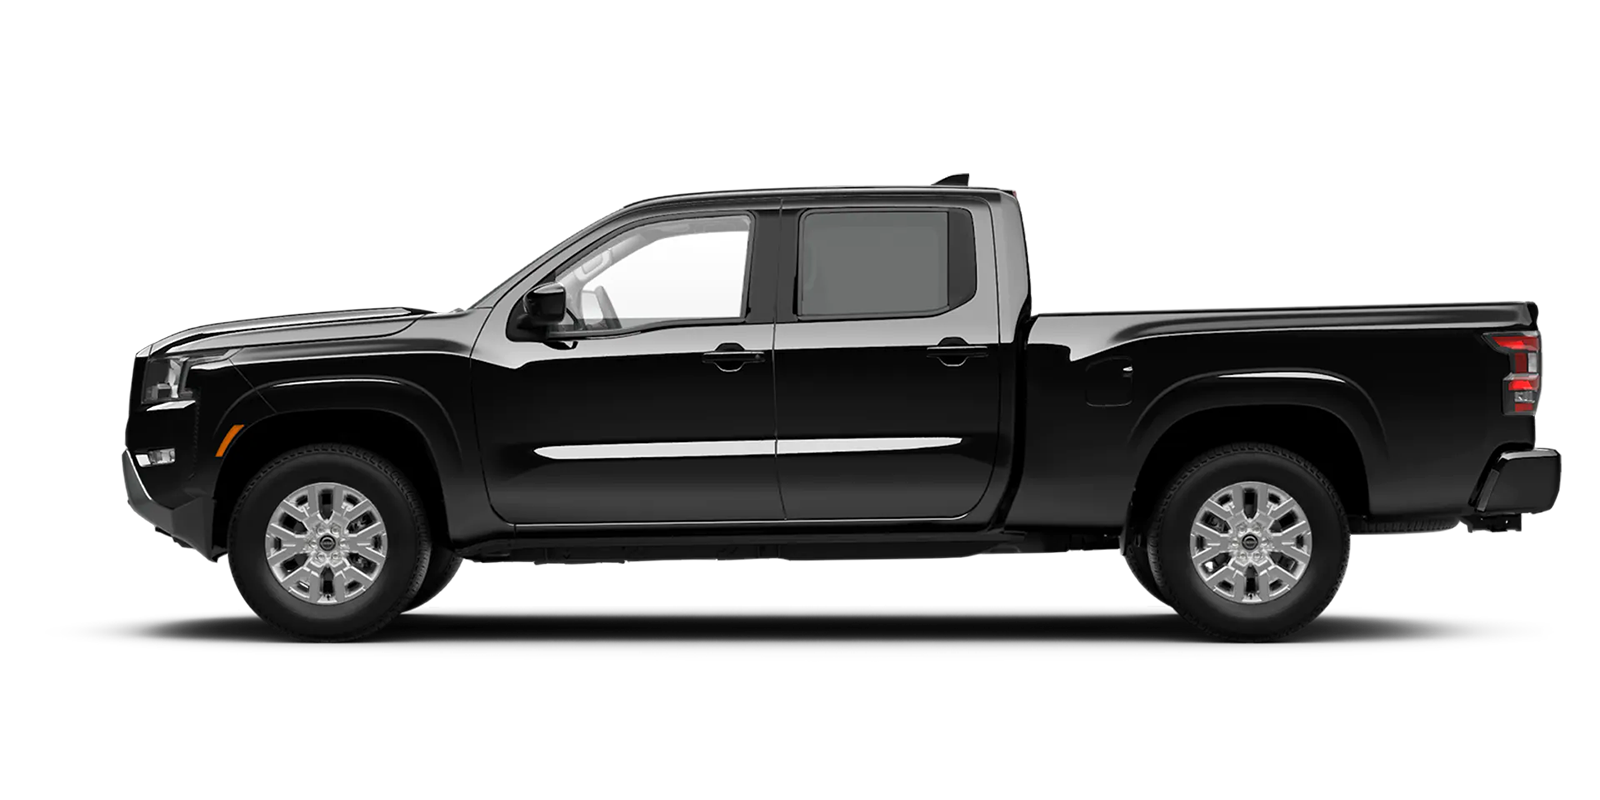 2022 Frontier Crew Cab Long Bed SV 4x4 in Super Black | Courtesy Nissan PA in Altoona PA